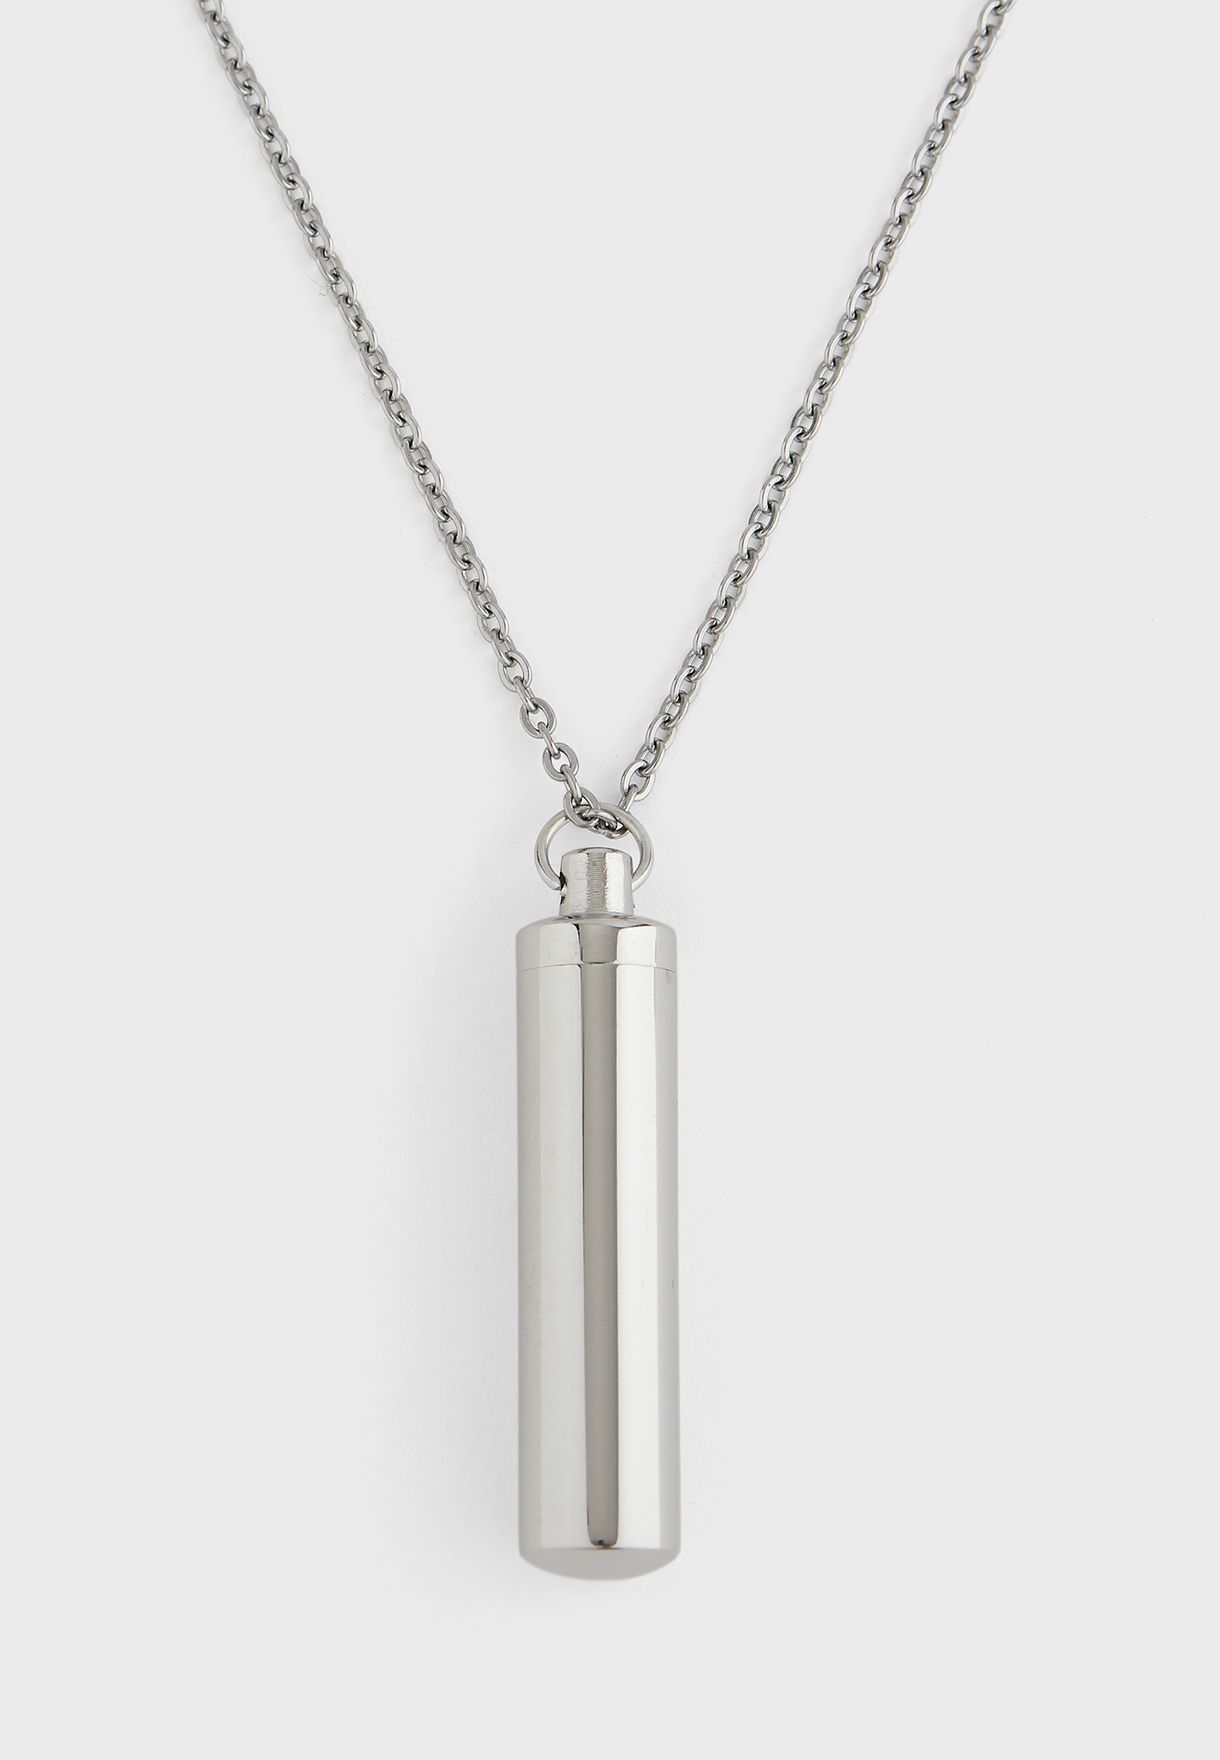 Stainless Steel Brushed Pendant Necklace